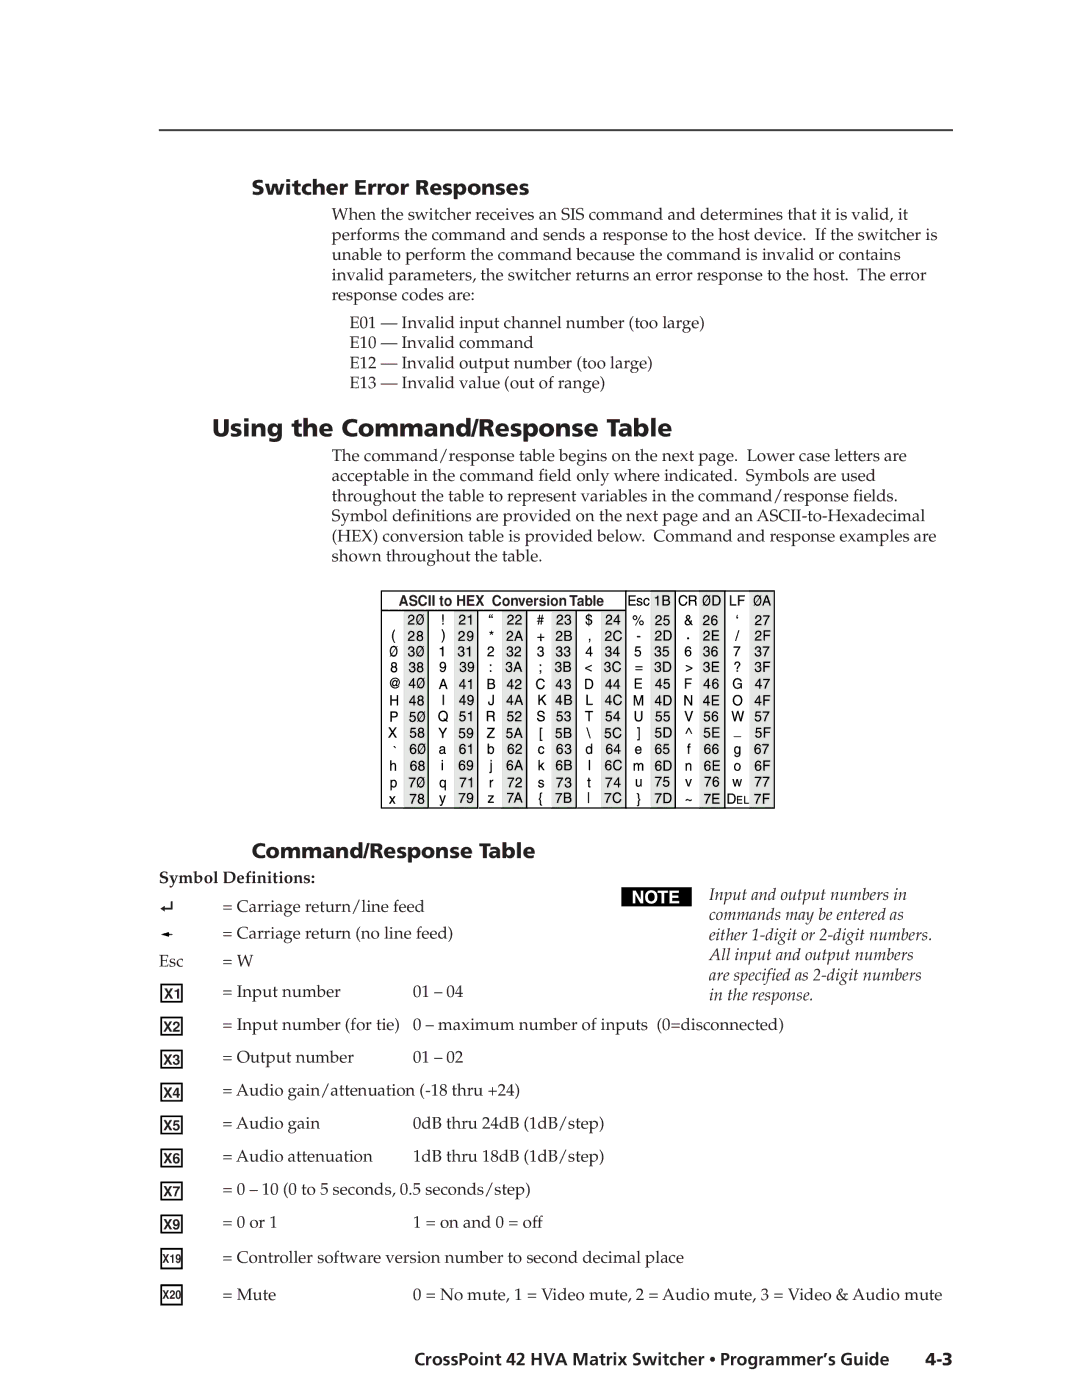 Extron electronic 42 HVA manual Using the Command/Response Table, Switcher Error Responses, Symbol Definitions 